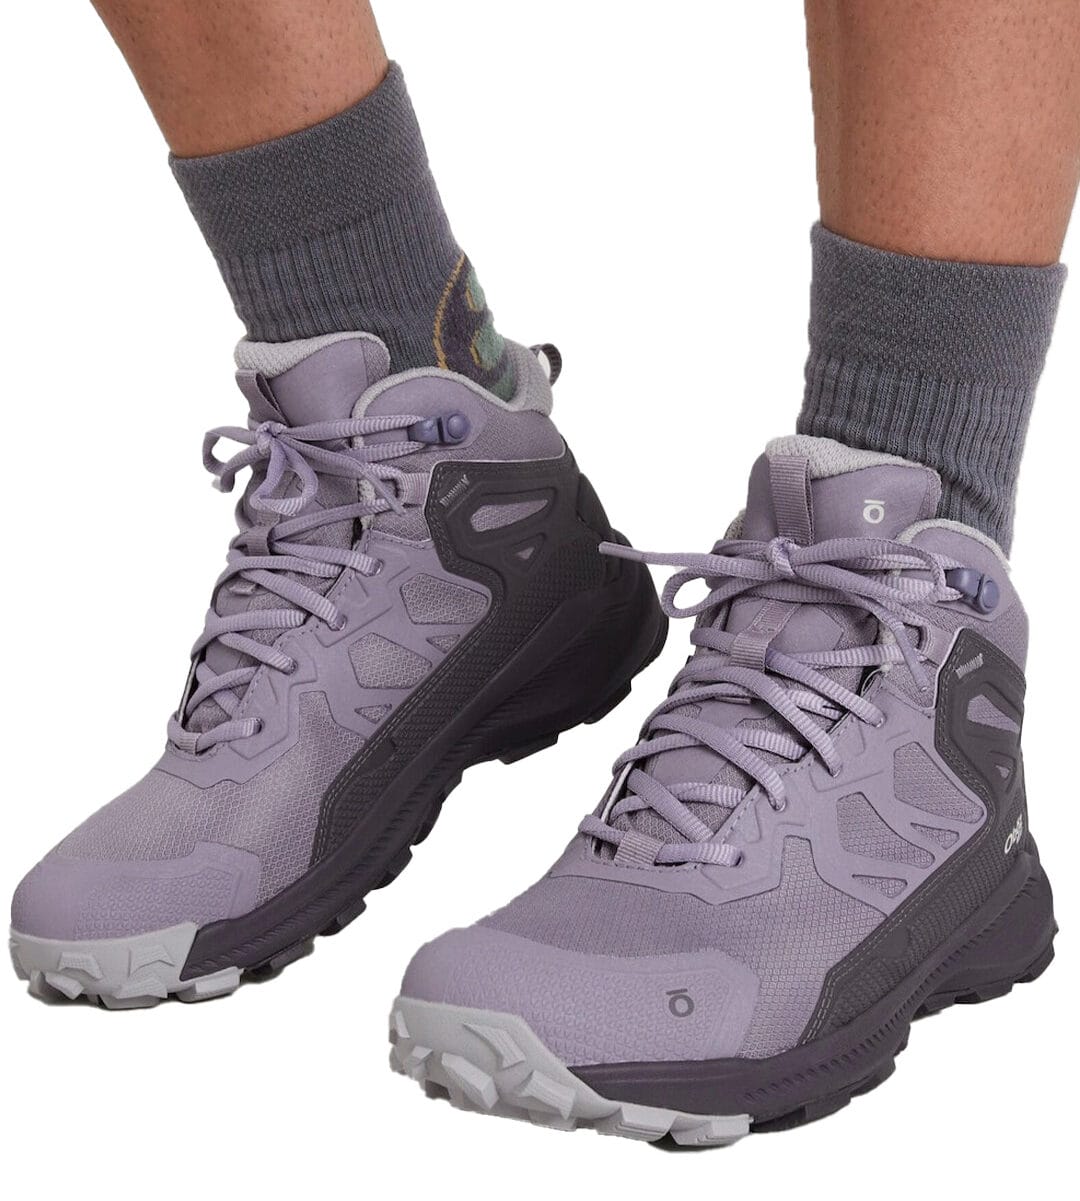 Kathmandu’s Zany New Collab With Jason Woodside Brings Bulk Colour to Your Outdoor Outfit, sponsored, outdoor gear, outdoor kit, outdoor fashion, the oboz katabatic women's mid b-dry hiking boots in purple from the kathmandu summer range